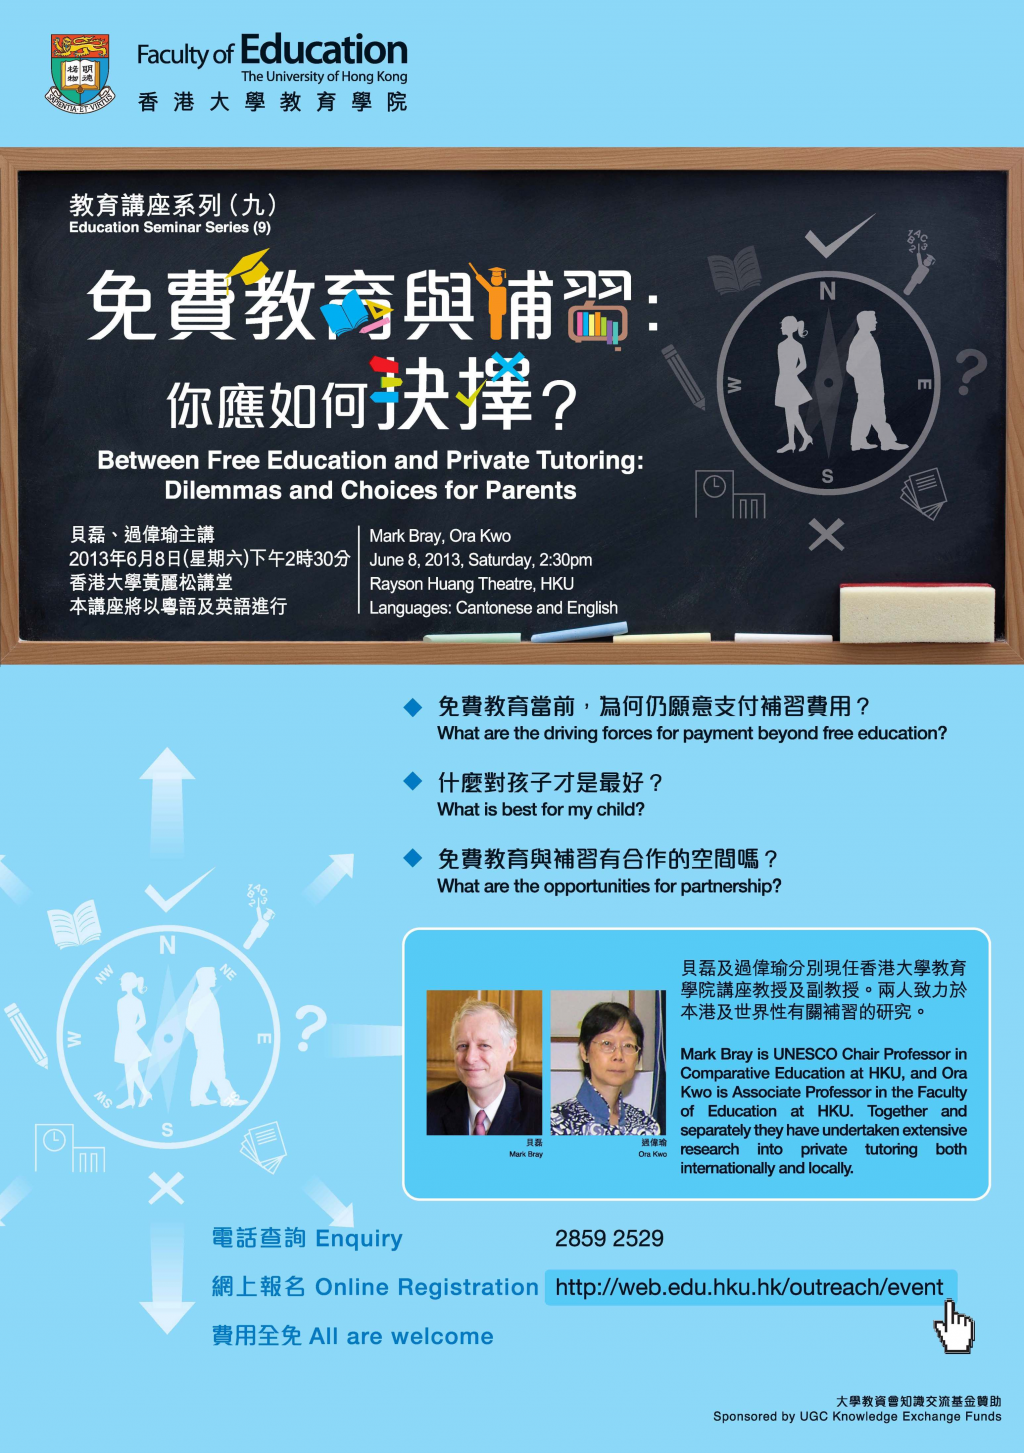 Education Seminar Series (9) -“Between Free Education and Private Tutoring: Dilemmas and Choices for Parents” 